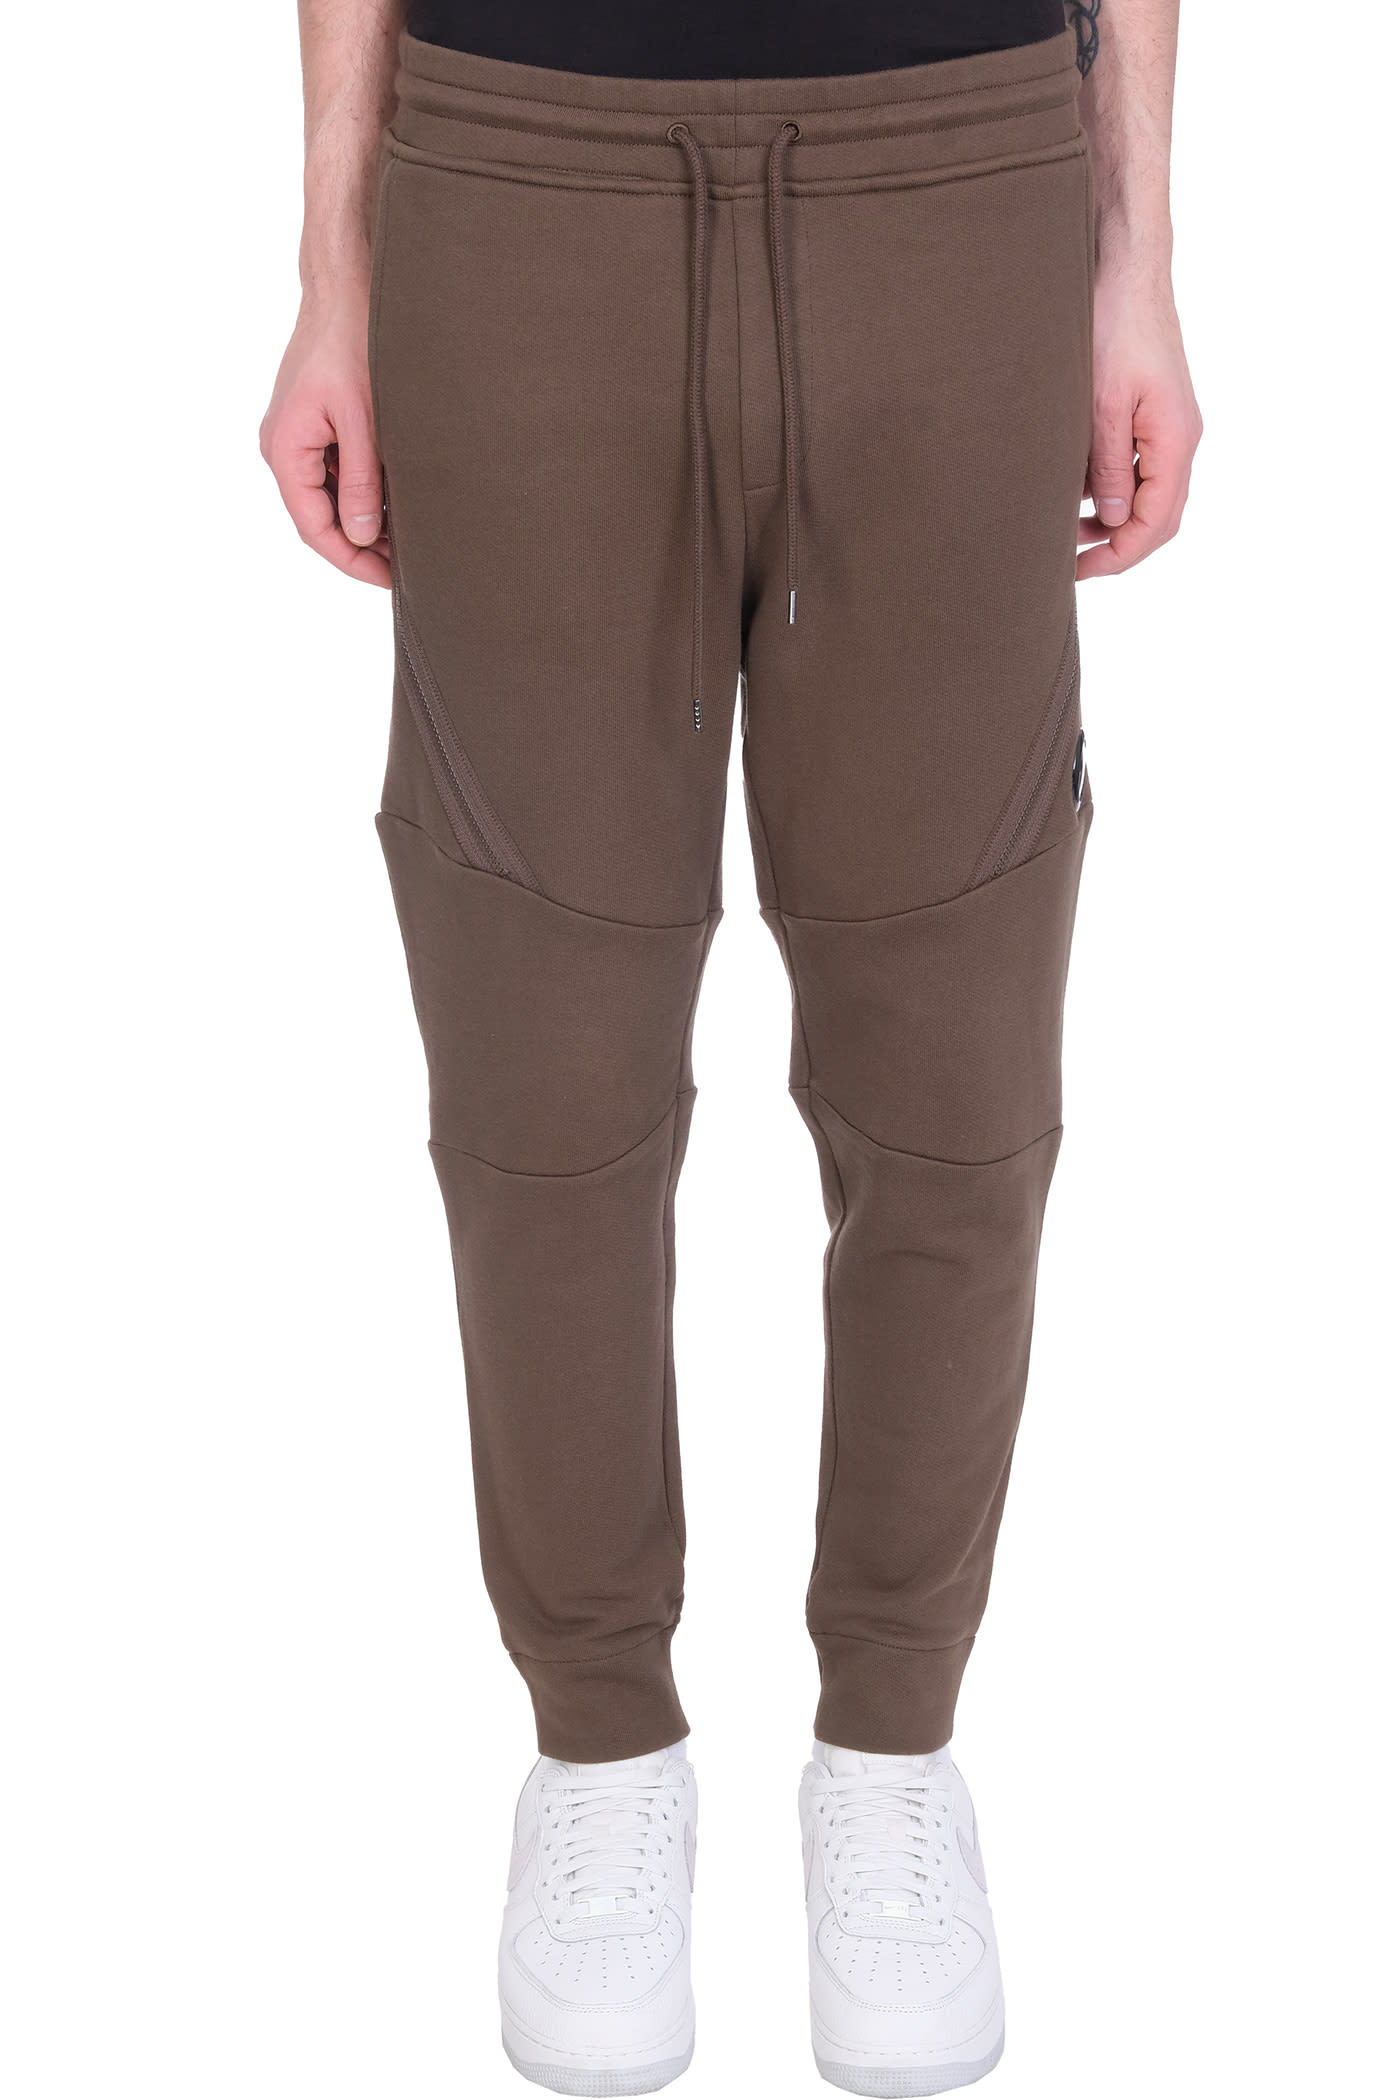 C.P. Company Pants In Green Cotton